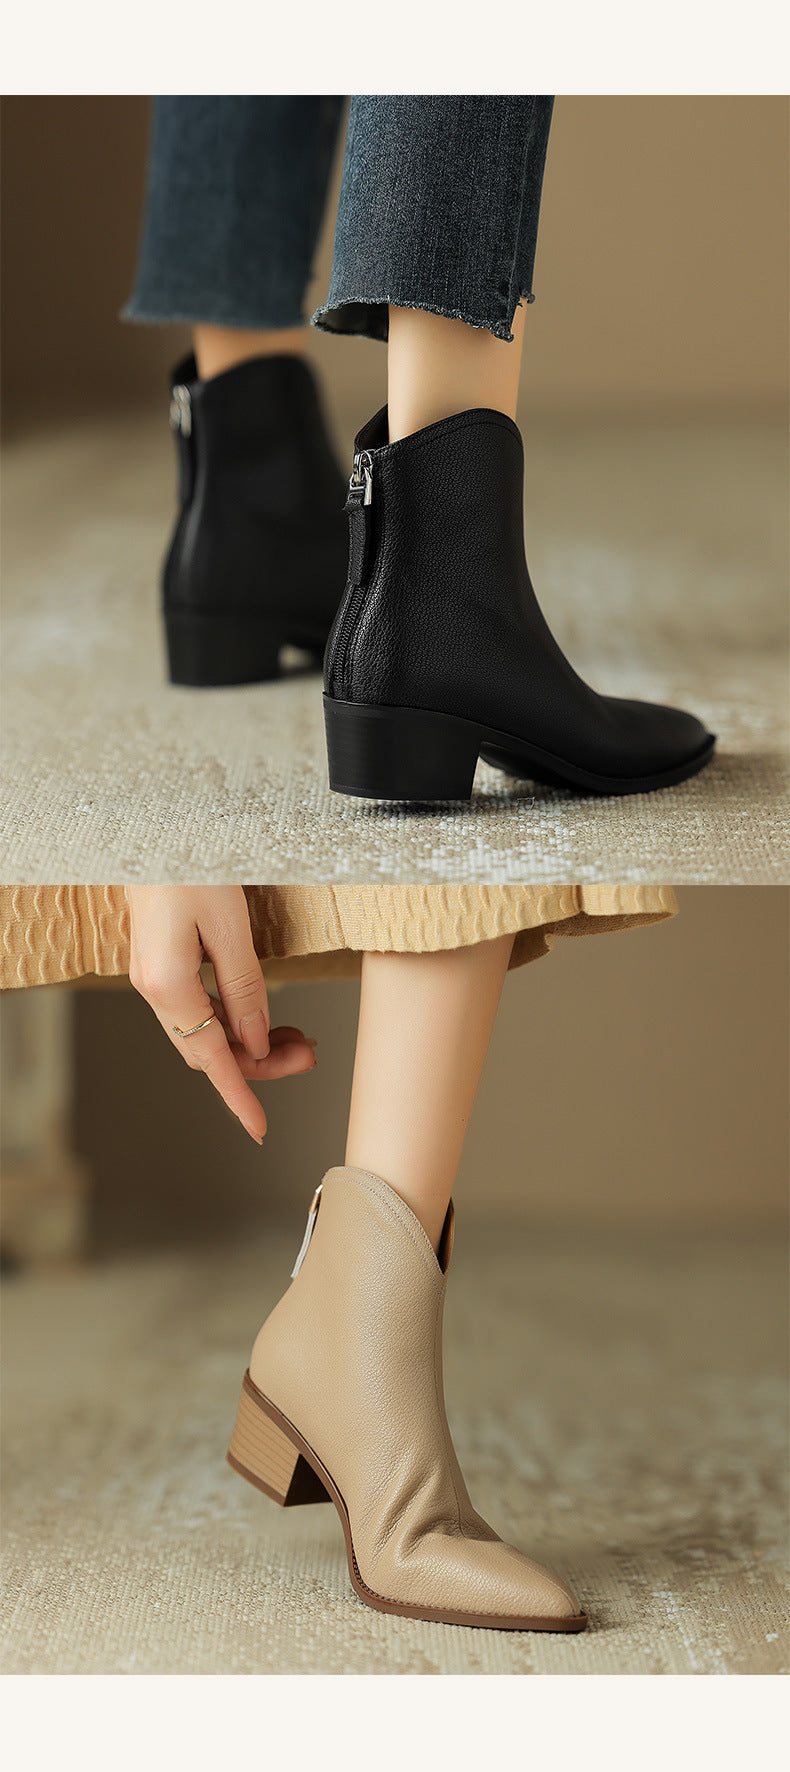 Women's Nude Ankle Boots